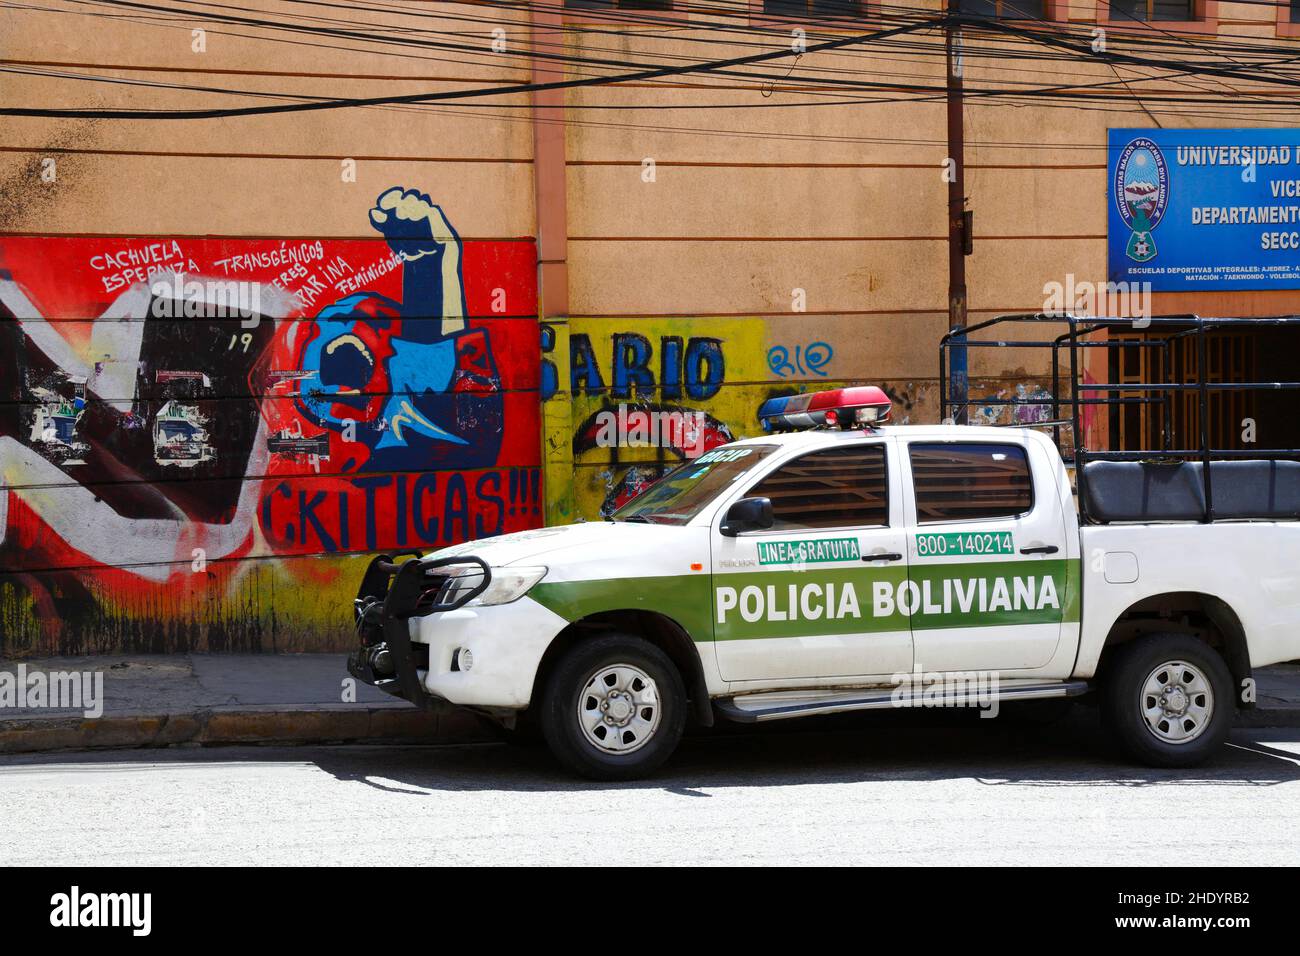 Bolivian police Toyota Hilux pickup parked next to Communist Party protest mural outside the UMSA University, La Paz, Bolivia Stock Photo